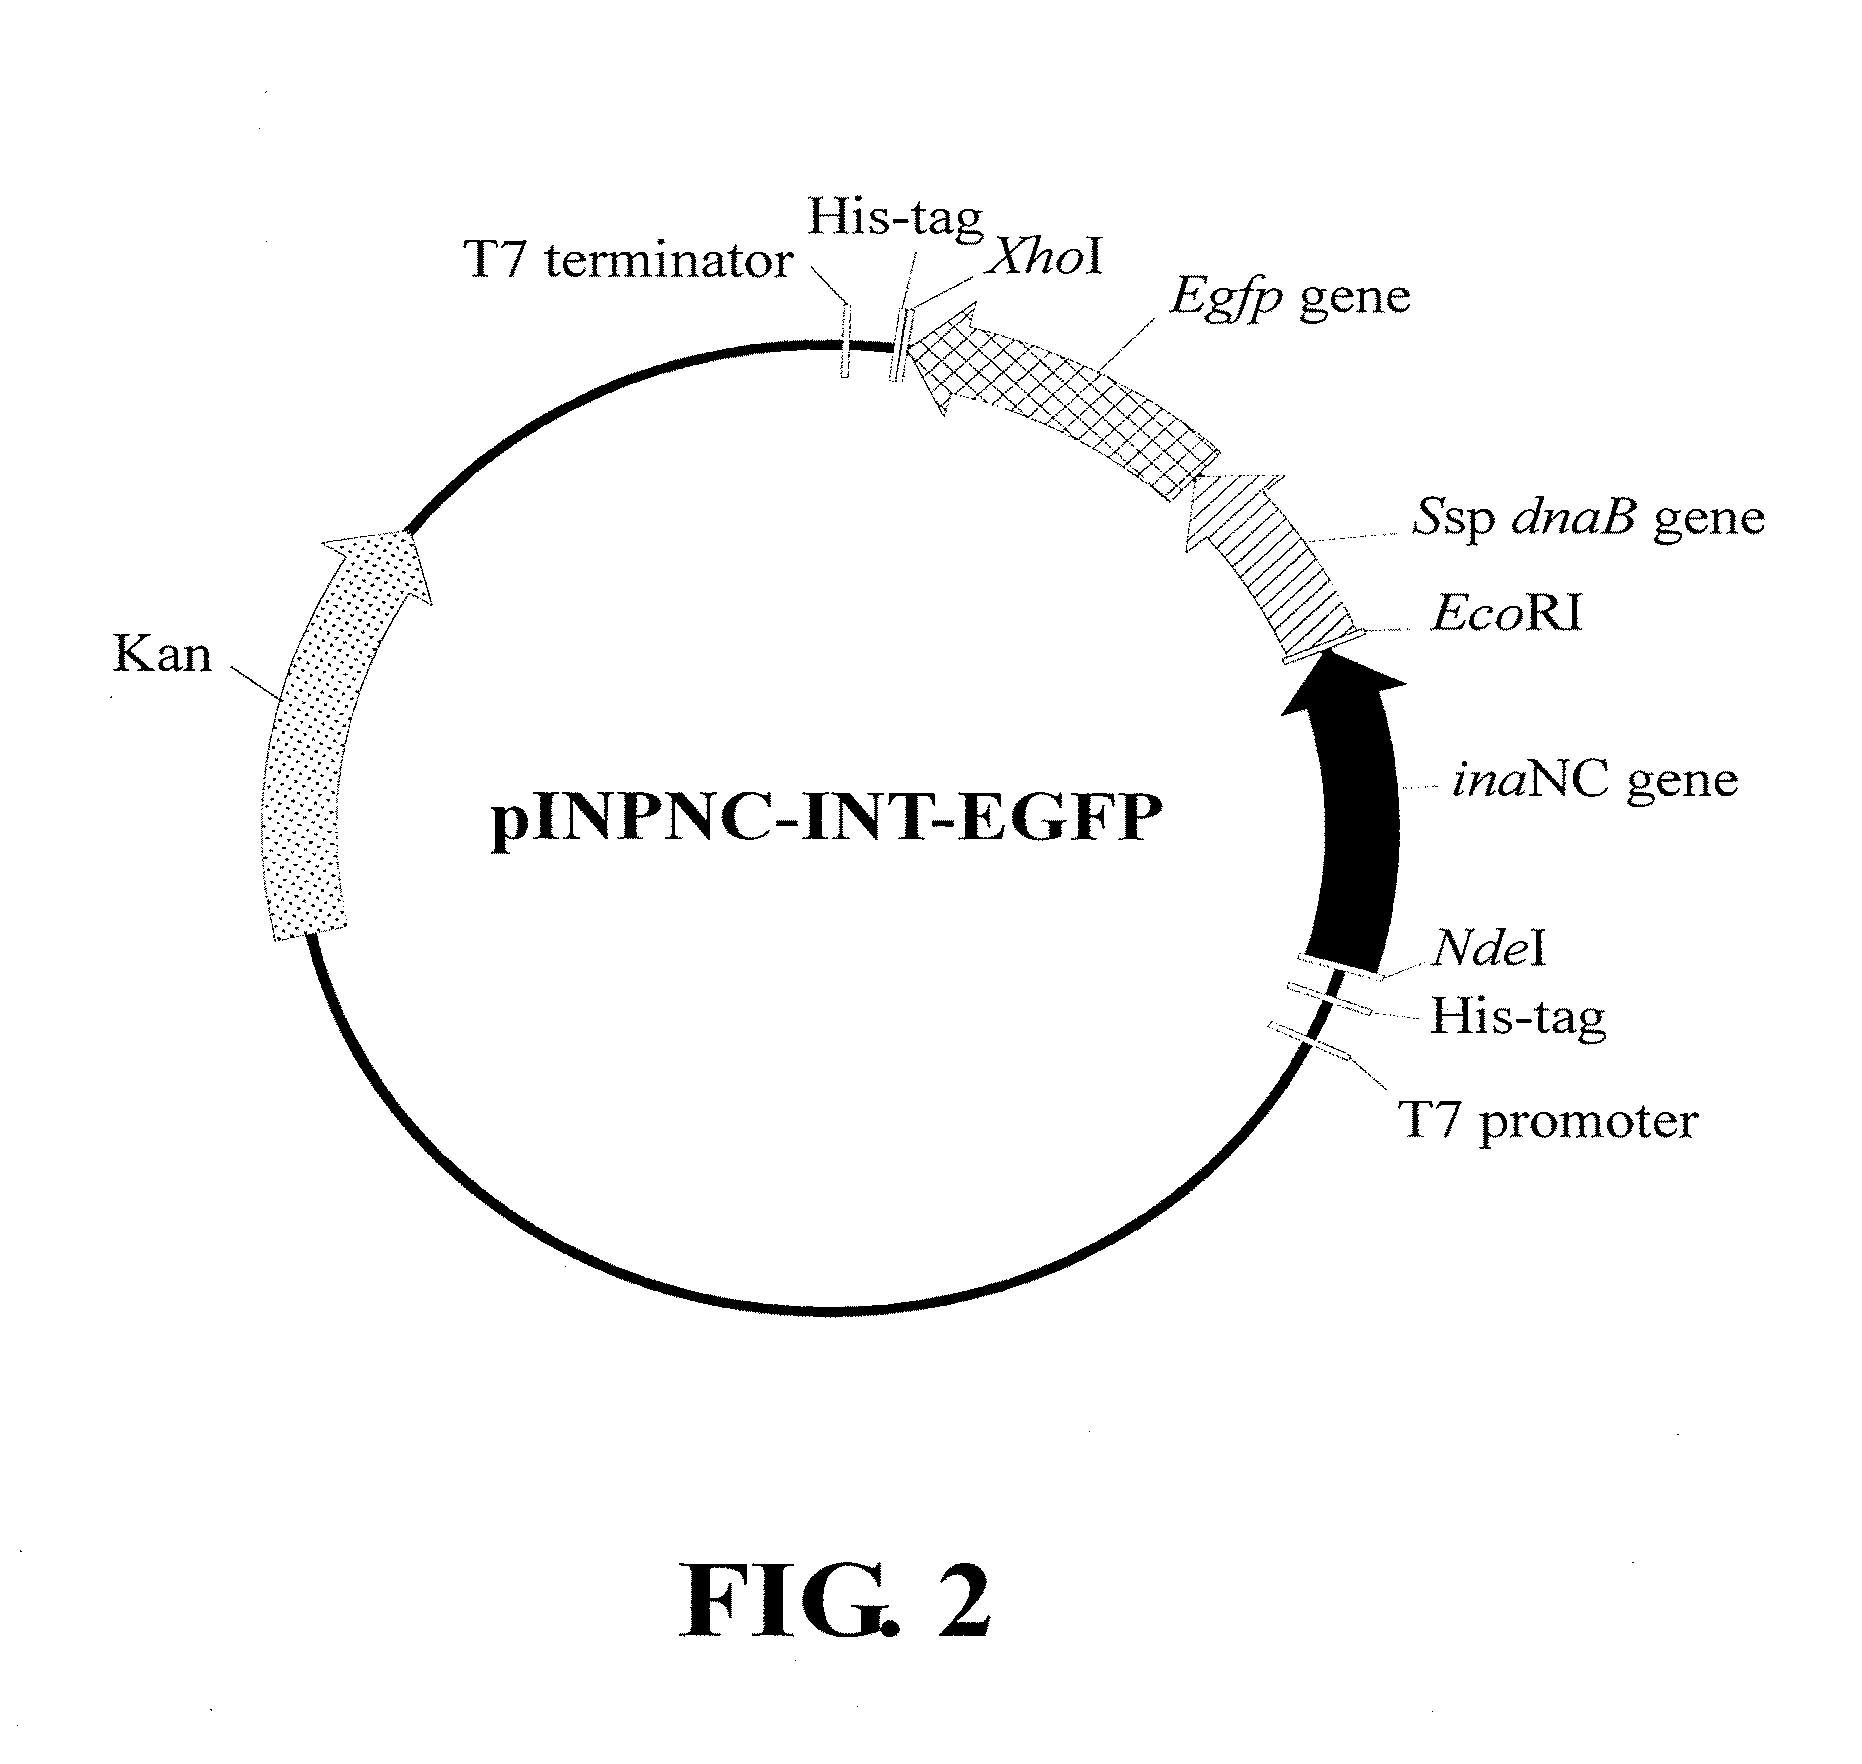 Expression Cassette, Recombinant Host Cell and Process for Producing a Target Protein